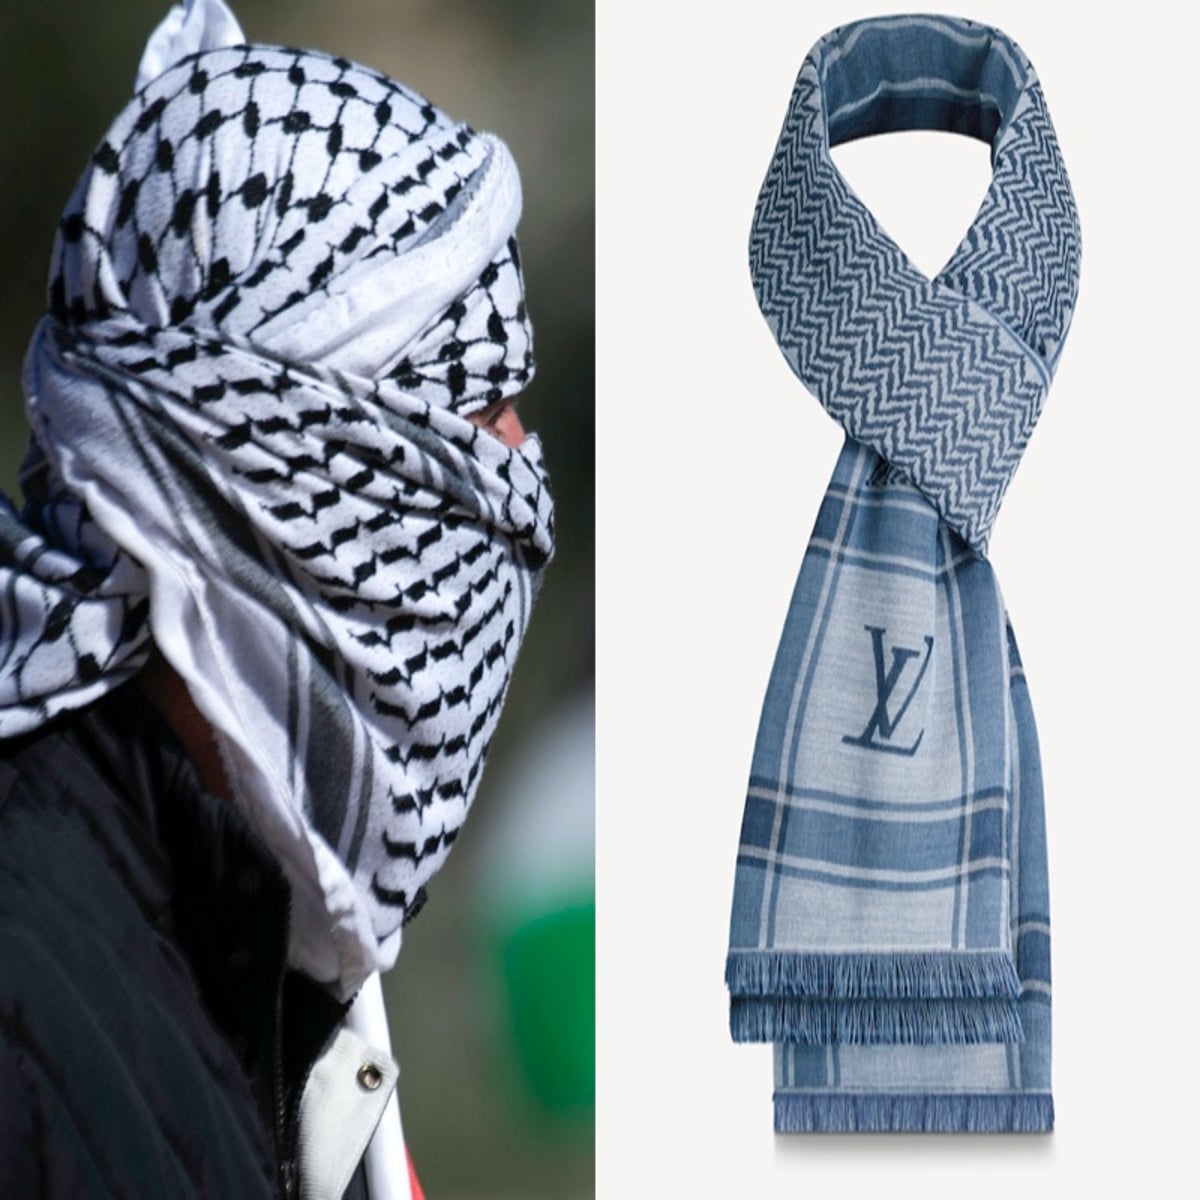 Louis Vuitton faces accusations of cultural appropriation over $705 scarf  inspired by Palestinian keffiyeh - GulfToday